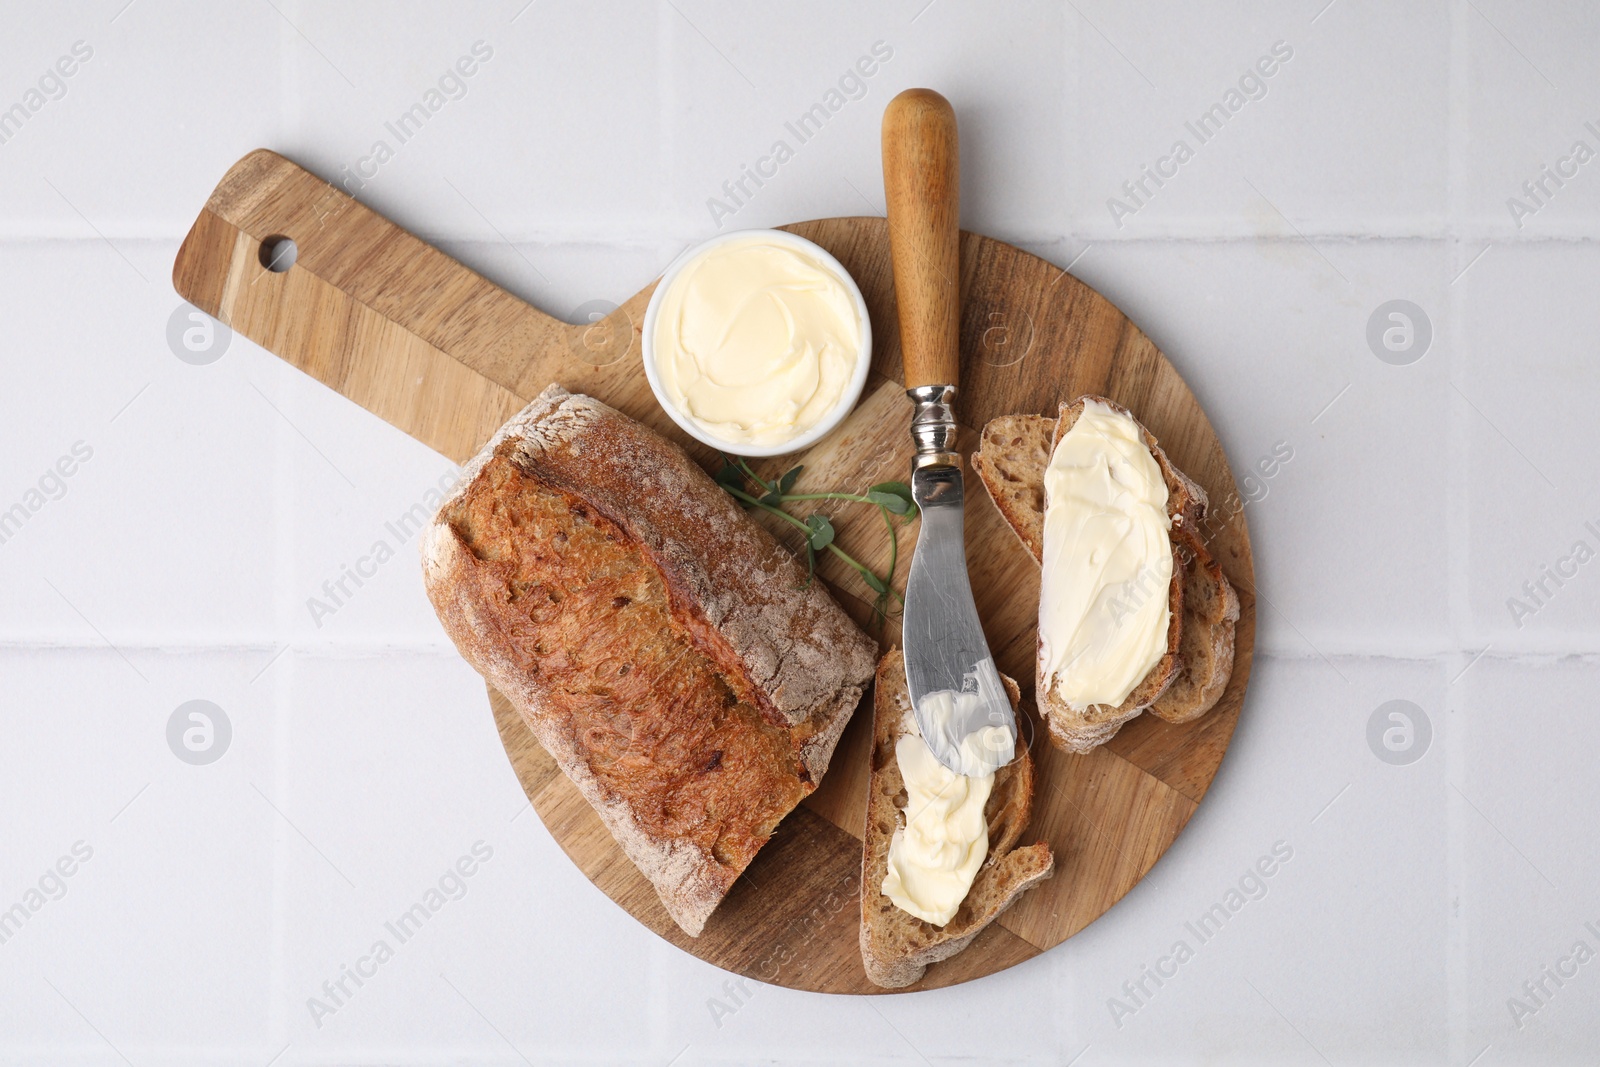 Photo of Tasty bread with butter and knife on white tiled table, top view